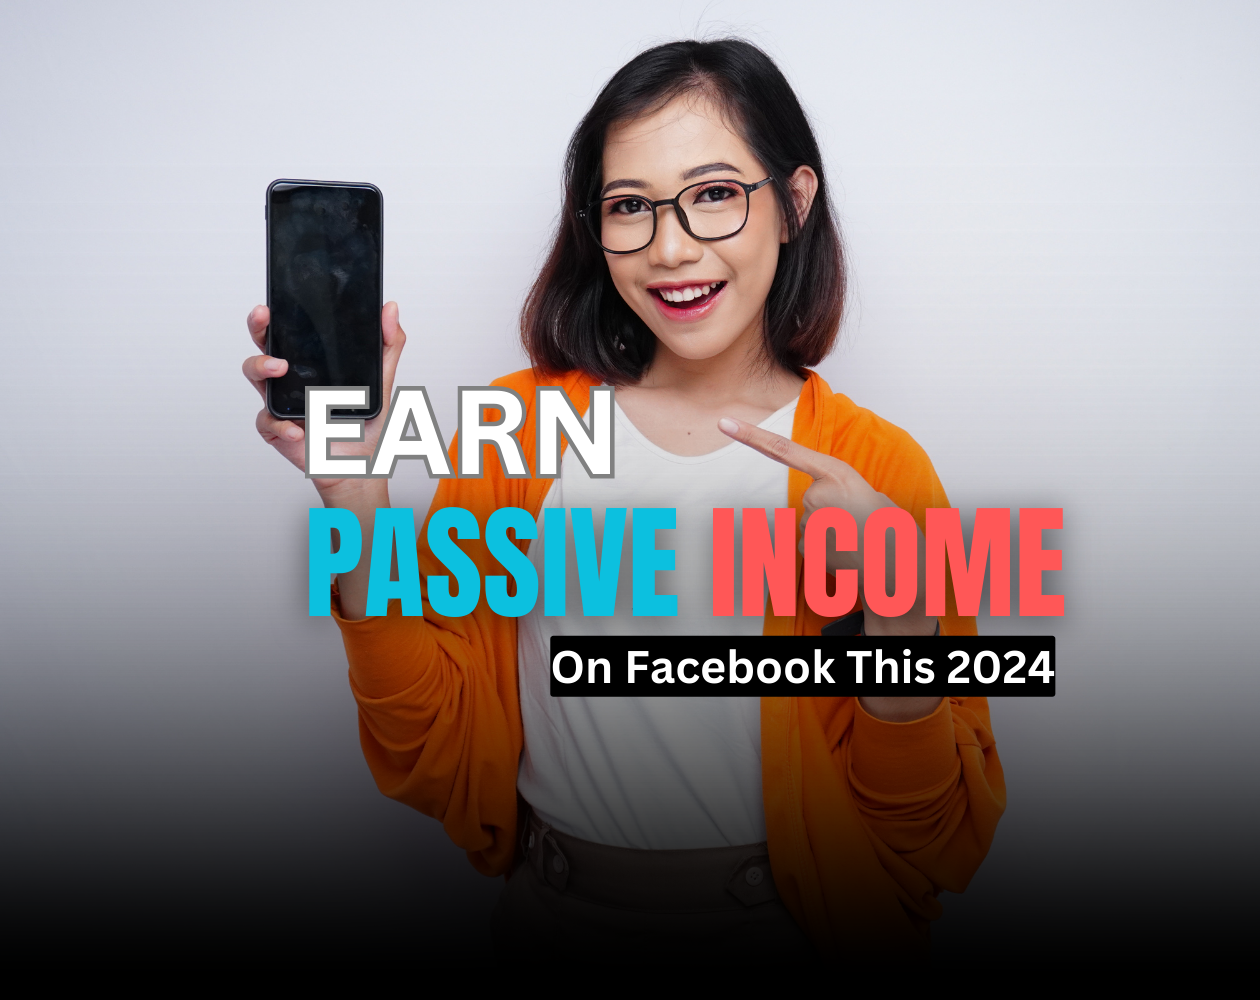 Earn passive income using Facebook Reels this 2024. Facebook Reels have exploded in popularity over the last couple of years. The short-form video feature allows anyone to create fun and engaging video content right within the Facebook app. And the best p